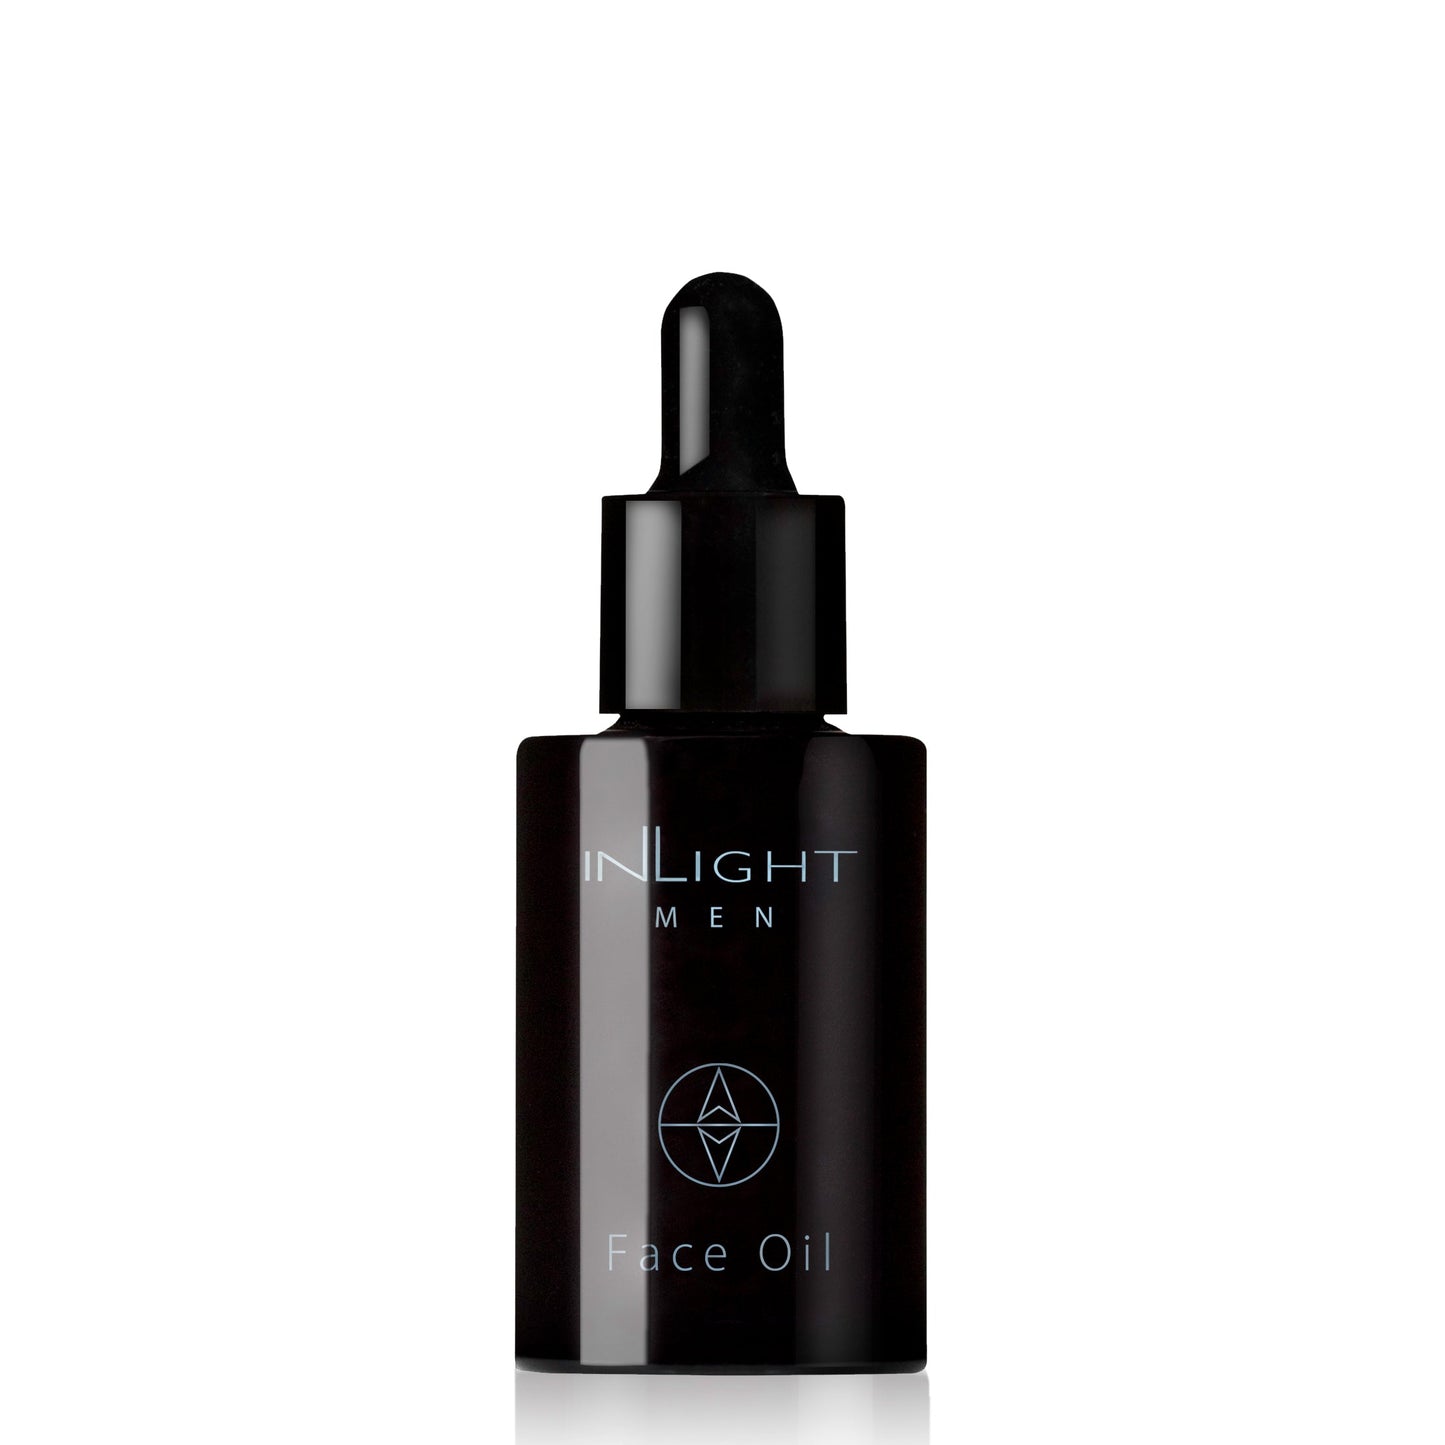 inlight beauty 100% organic face oil for men. handmade in cornwall. black miron flass bottle and pipette is on a white background